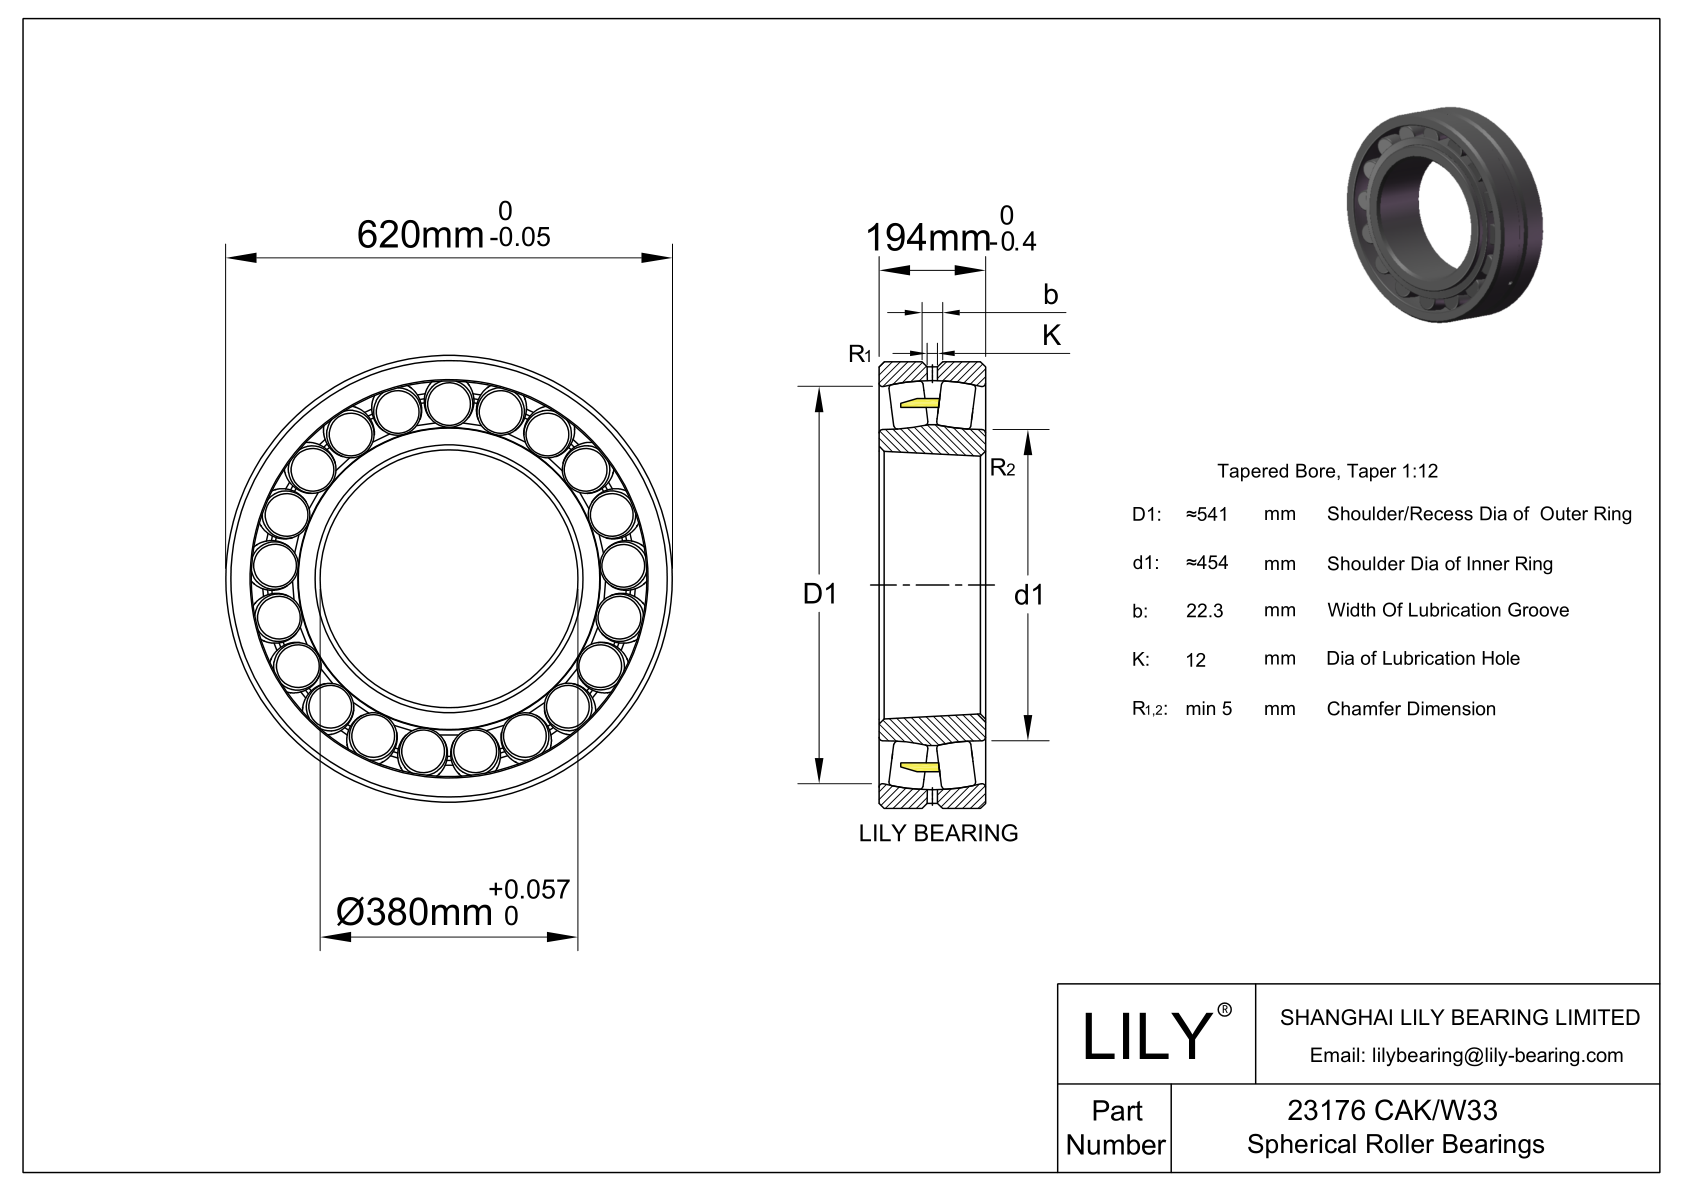 23176 CAK/W33 Double Row Spherical Roller Bearing cad drawing